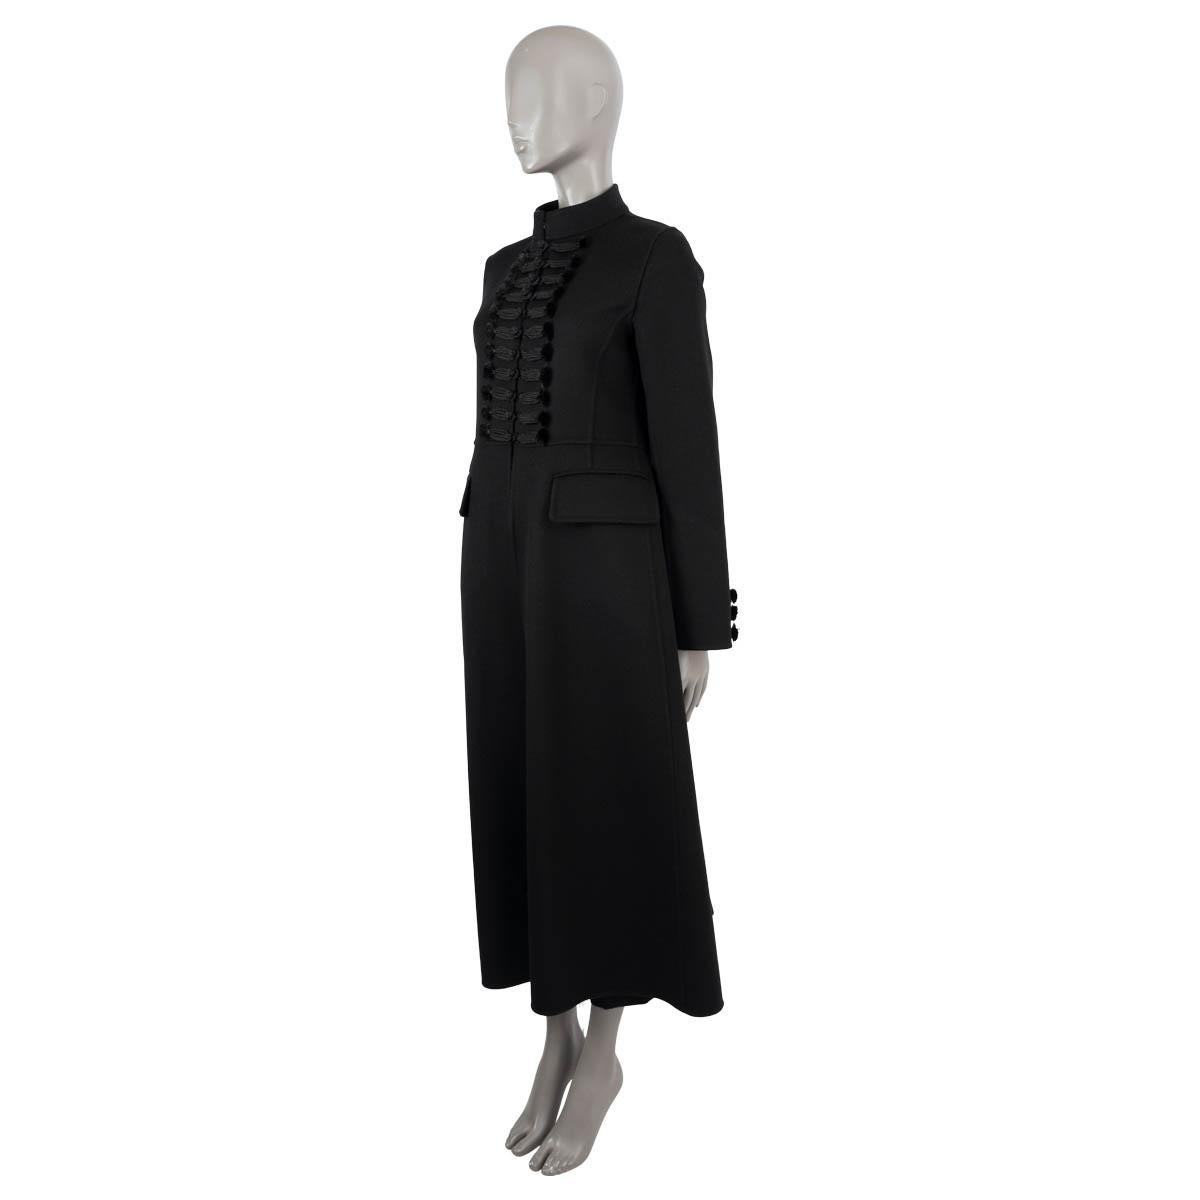 100% authentic Christian Dior 2023 Brandenburg coat in black cashmere (100%). Features 3/4 sleeves and two flap pockets on the front. Feature slit at the back, frog fasteners on the front and cuffs. Unlined. Has been worn and is in excellent